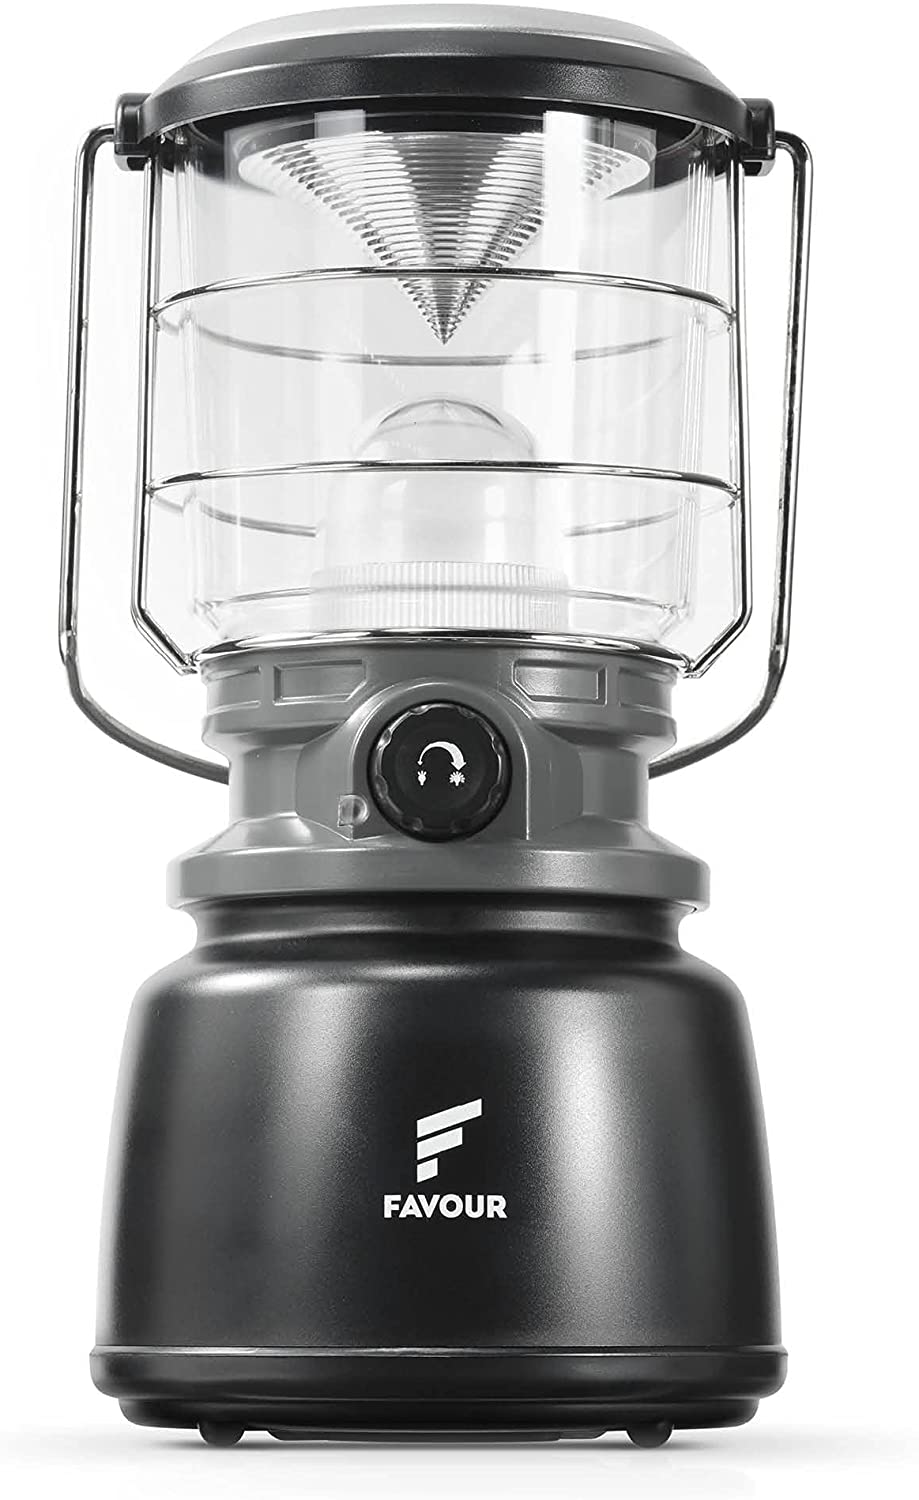 Favour Battery Operated Camp Lantern, 1300 Lumen, Dimmable, Waterproof, Adjustable Light Color Warm to Natural White, Candle Light Mode, LED Camping Light, LED Emergency Lantern